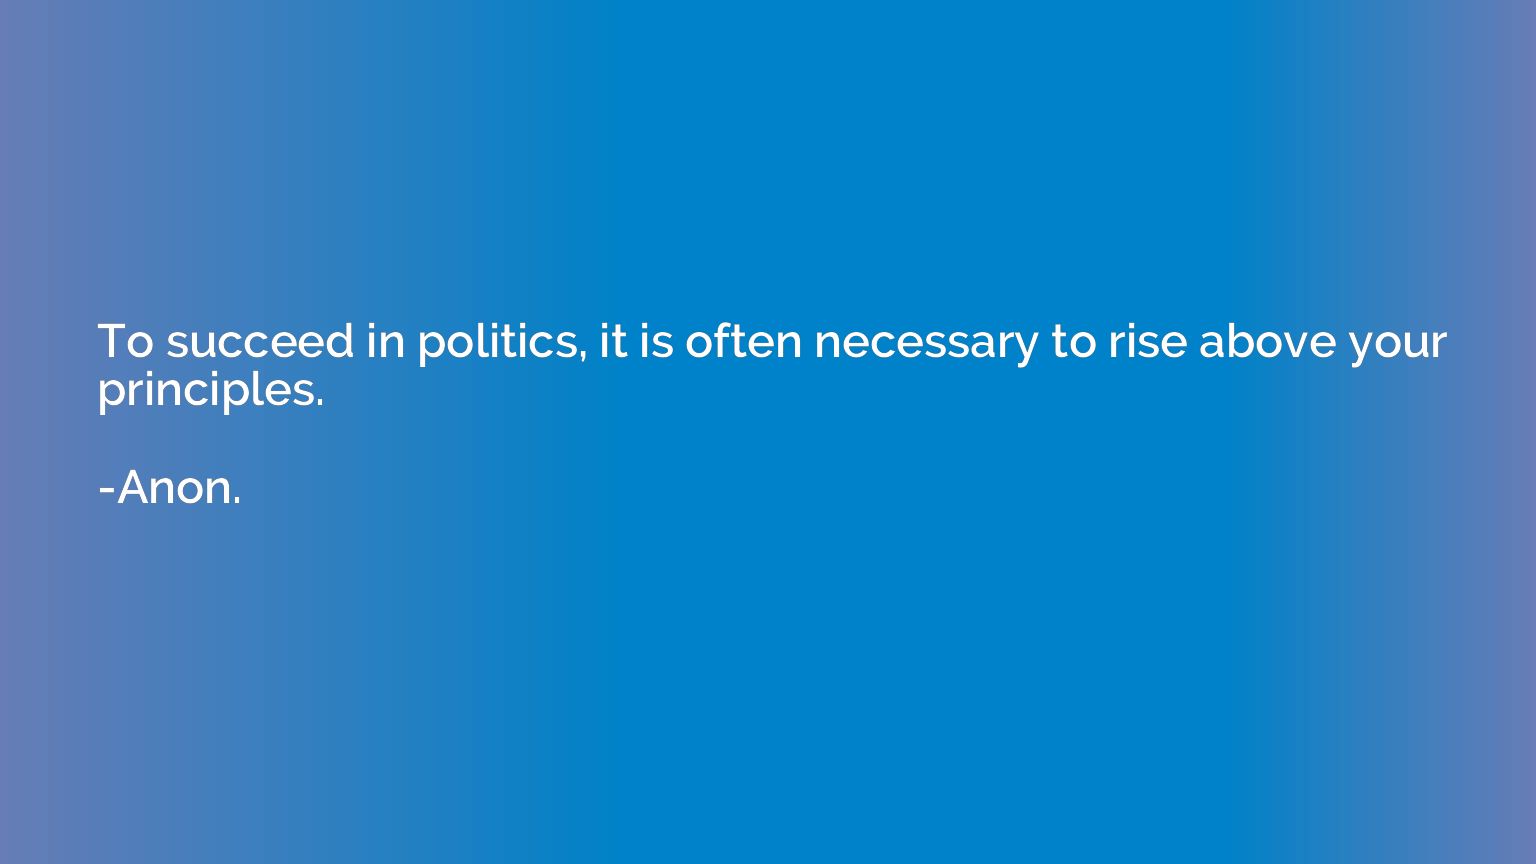 To succeed in politics, it is often necessary to rise above 